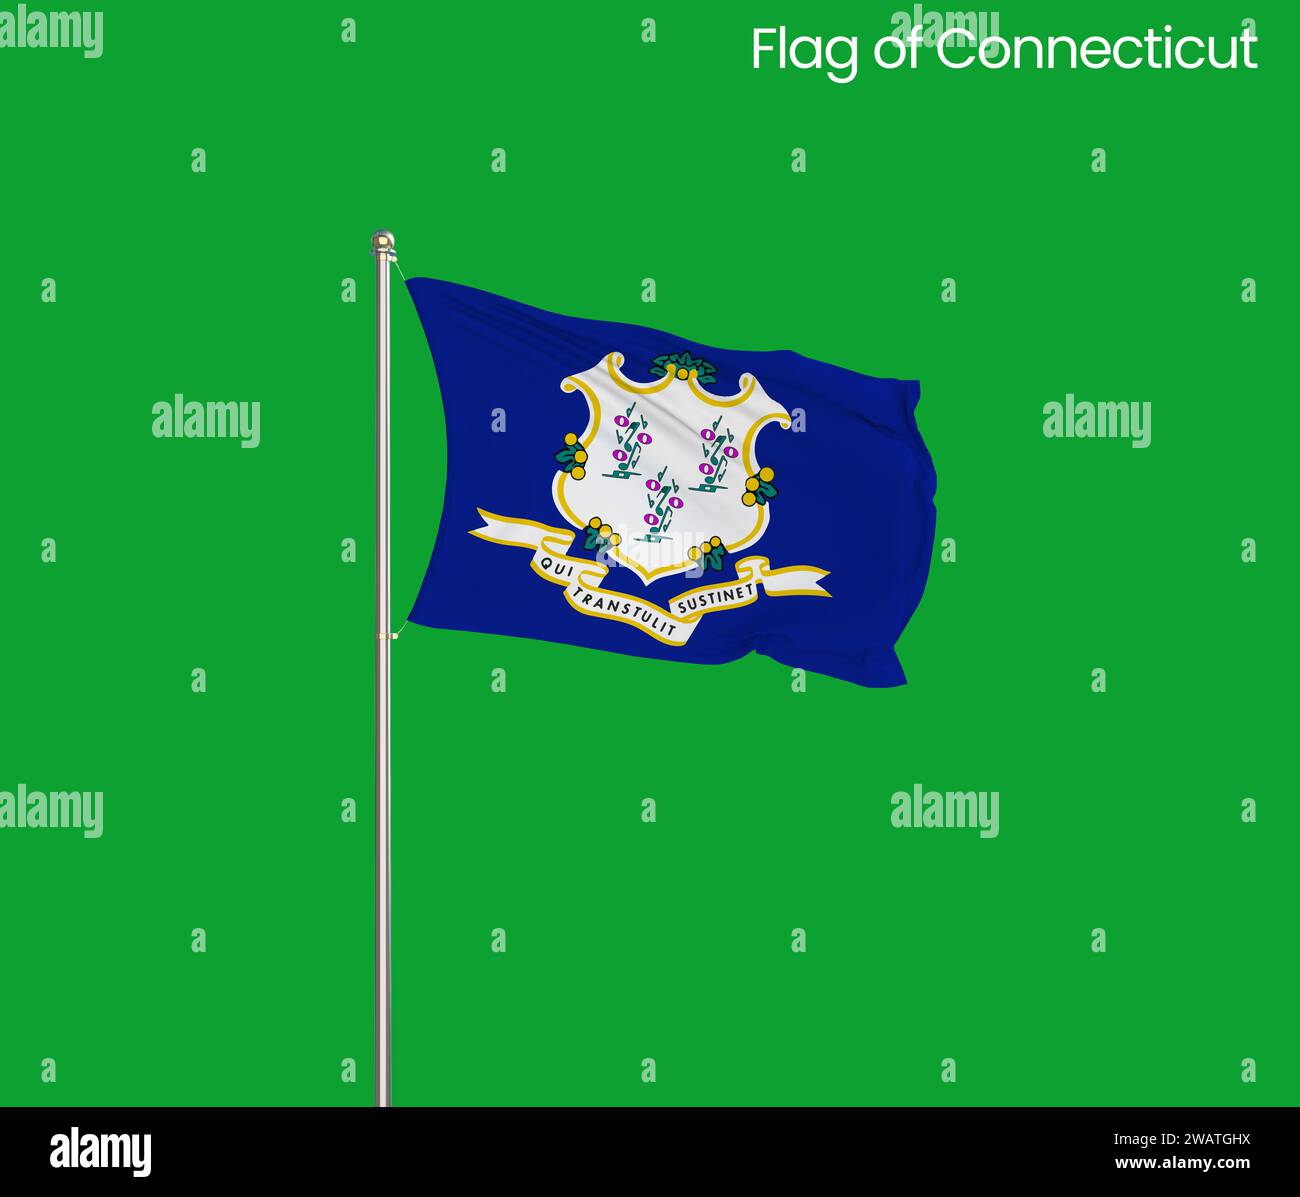 High detailed flag of Connecticut. Connecticut state flag, National Connecticut flag. Flag of state Connecticut. USA. America. Stock Photo